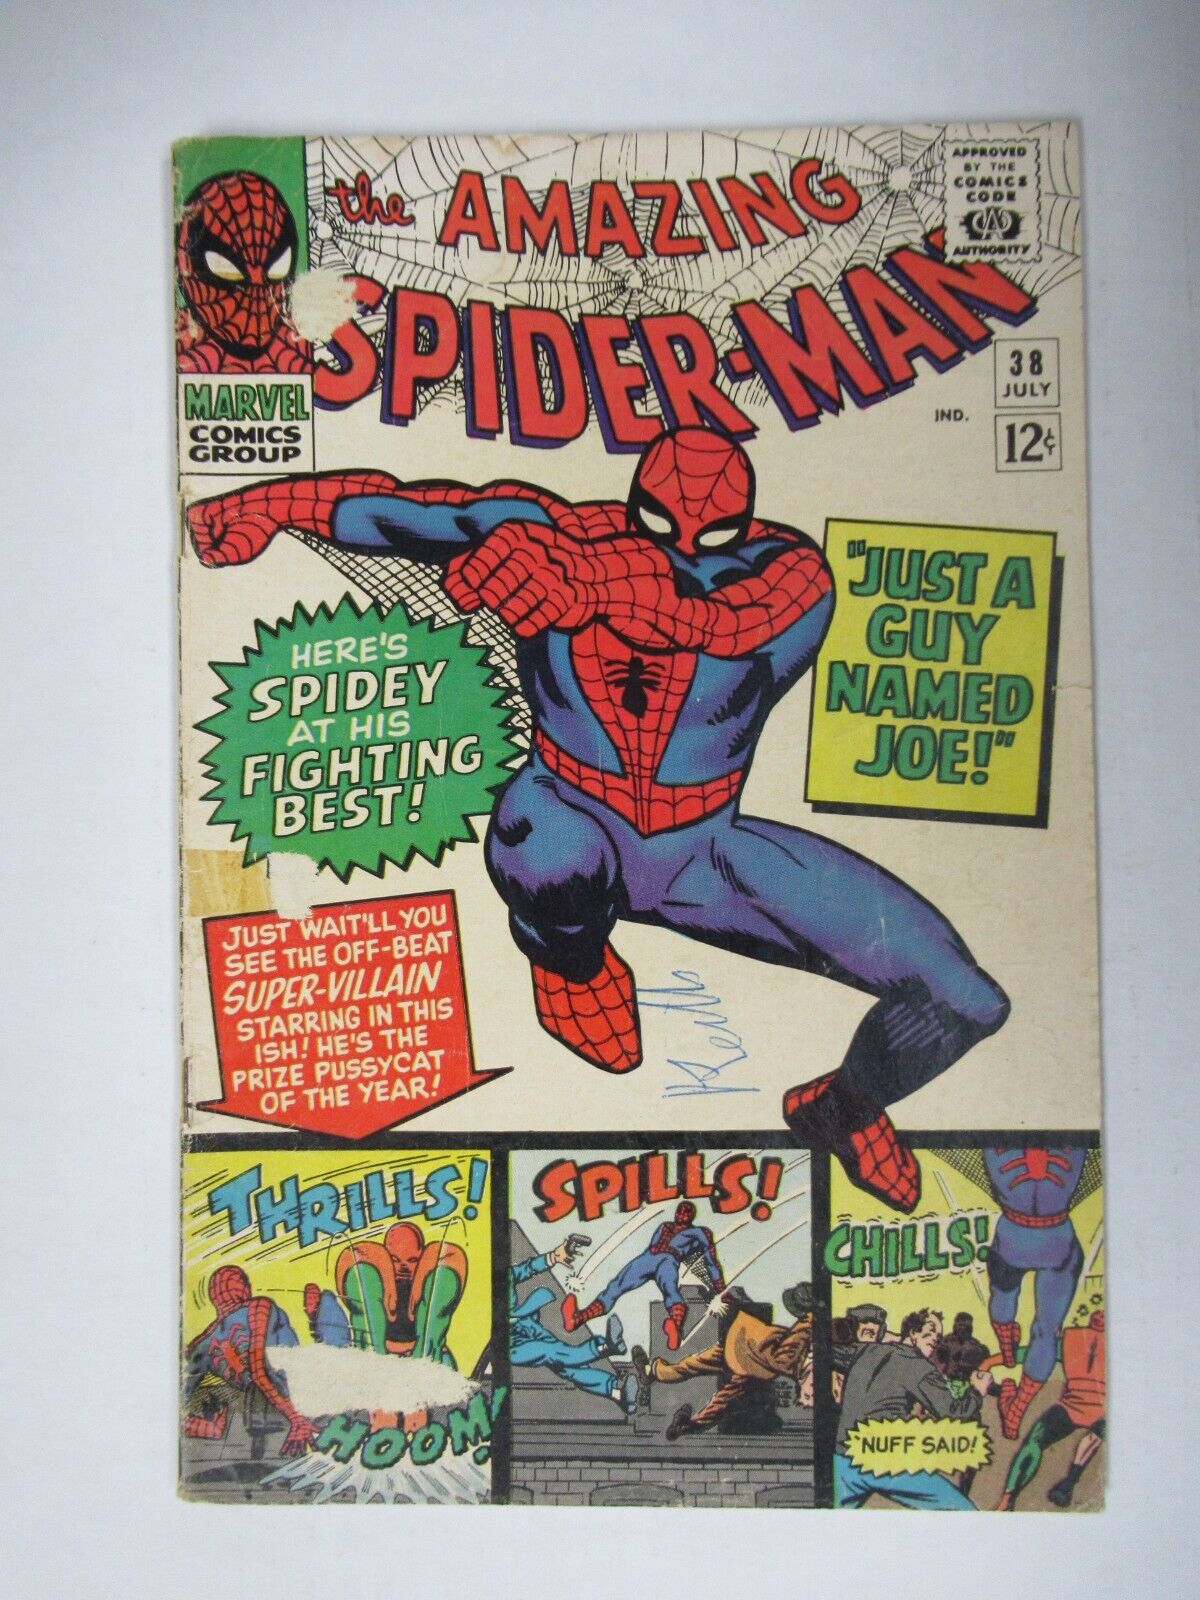 1966 Marvel Comics The Amazing Spider-Man #38 2nd Mary Jane Last Ditko issue